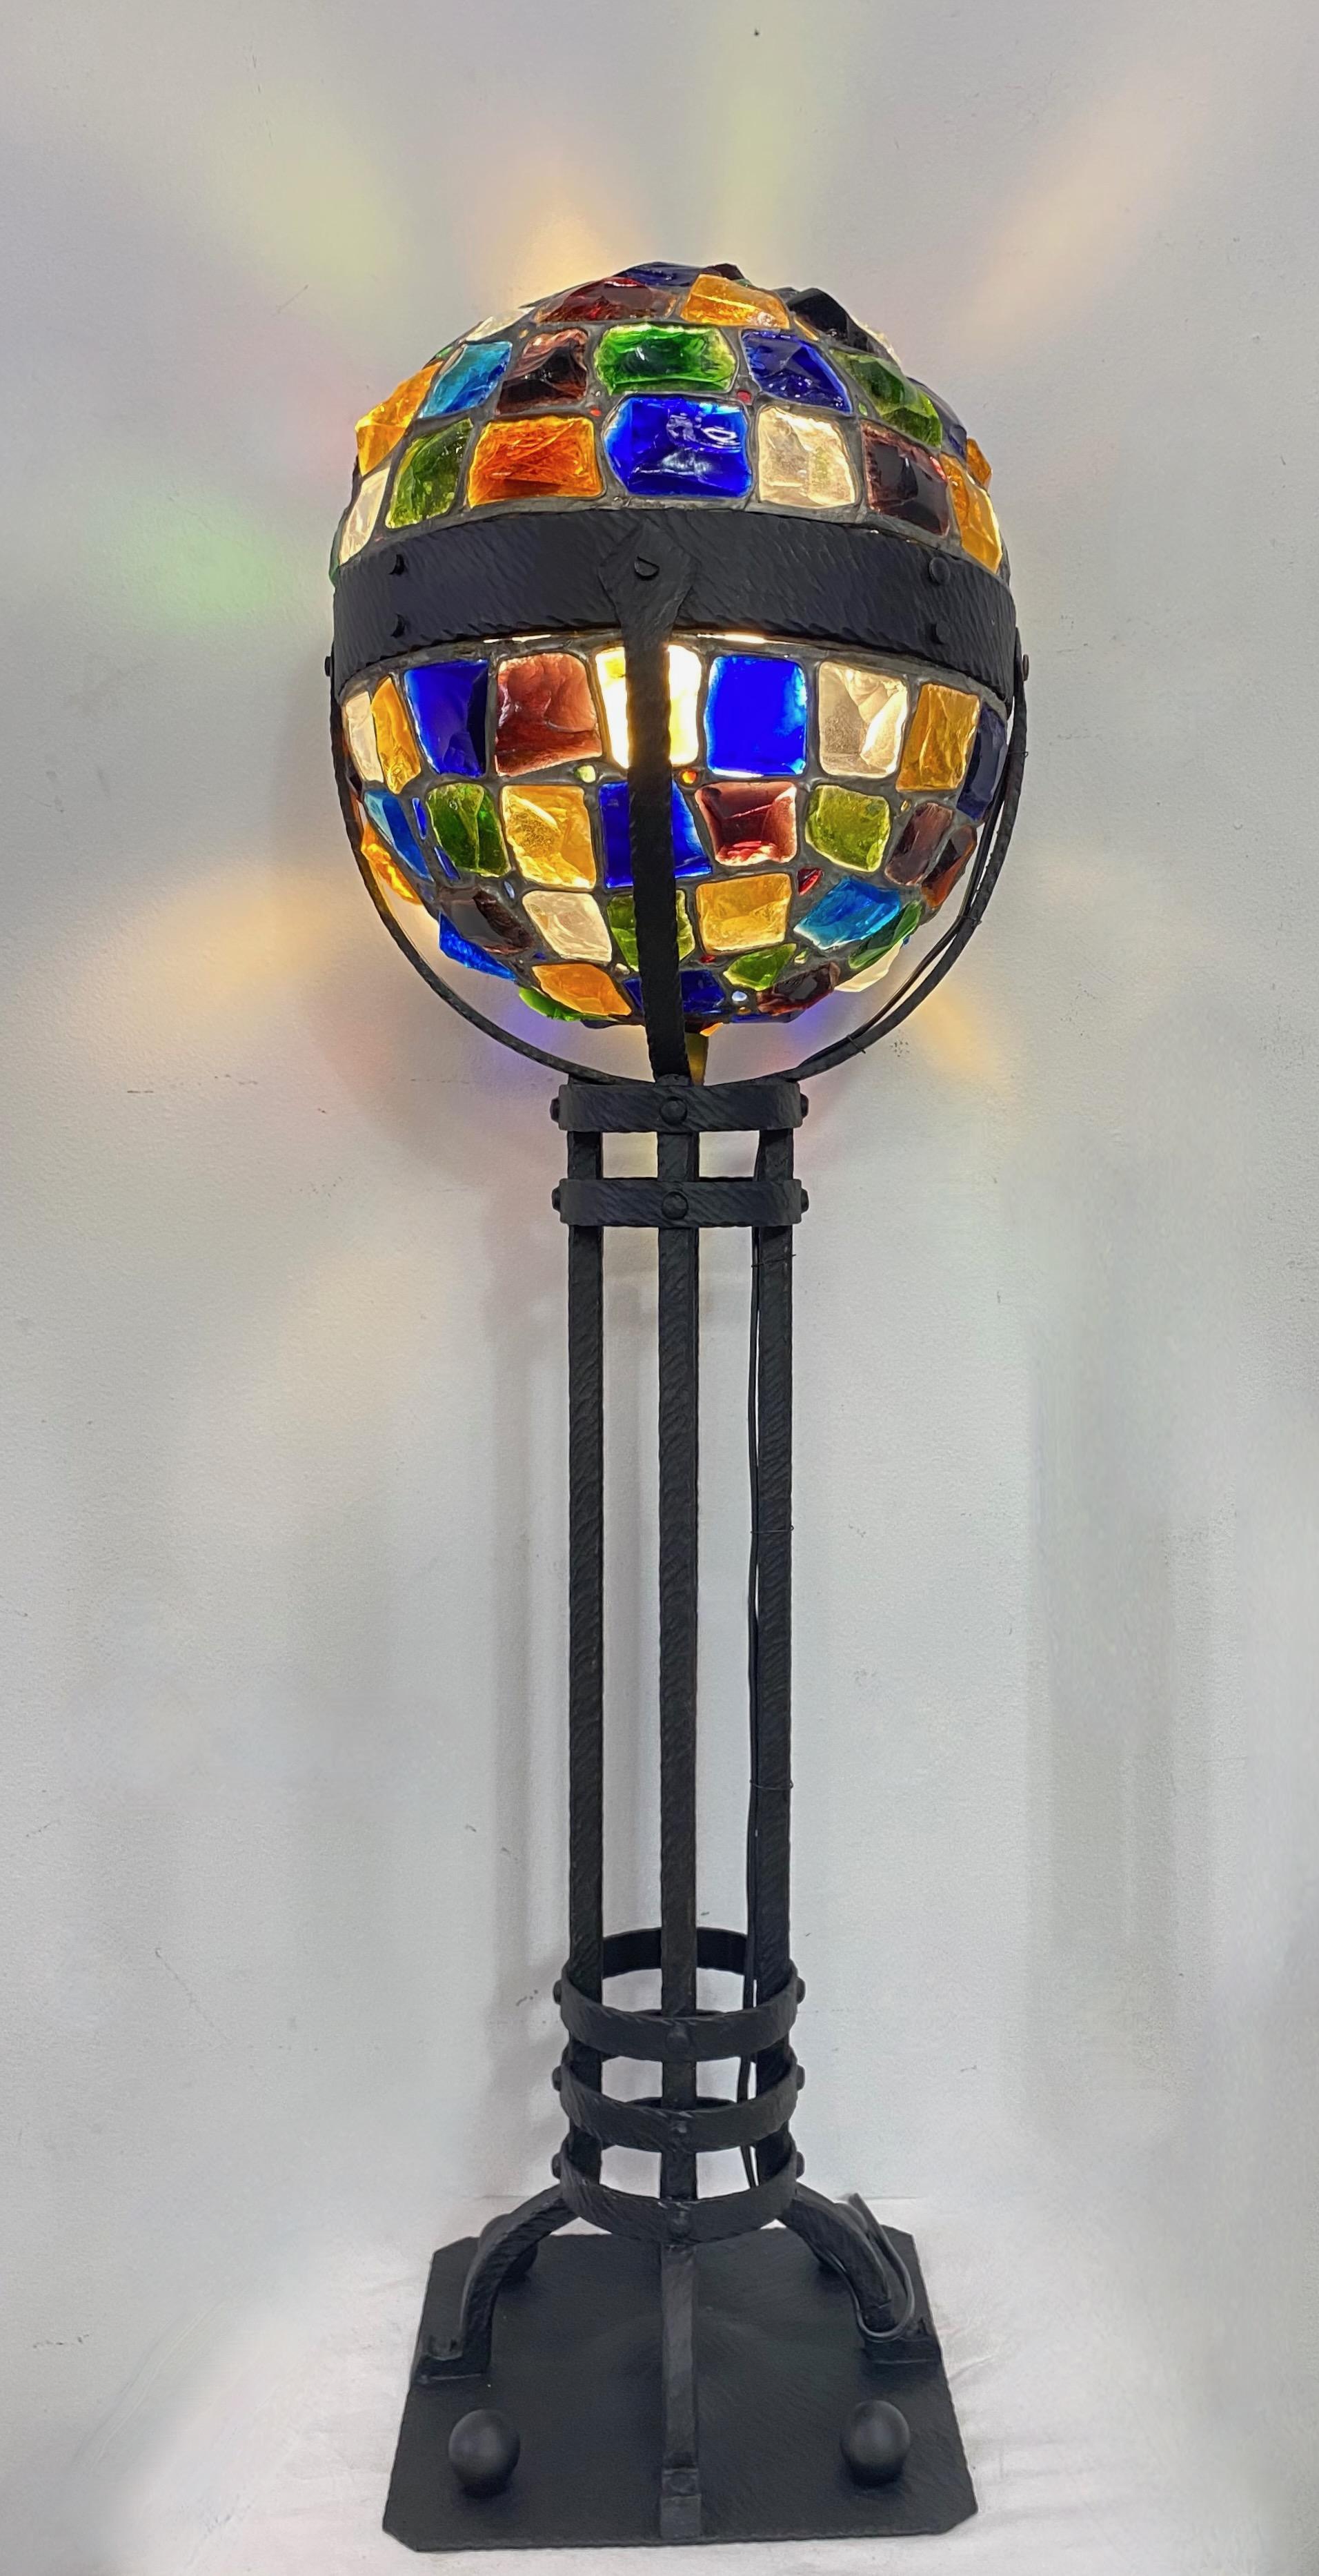 Austrian Secessionist Style Wrought Iron and Glass Chunk Jewel Newel Post Lamp, ca 1900